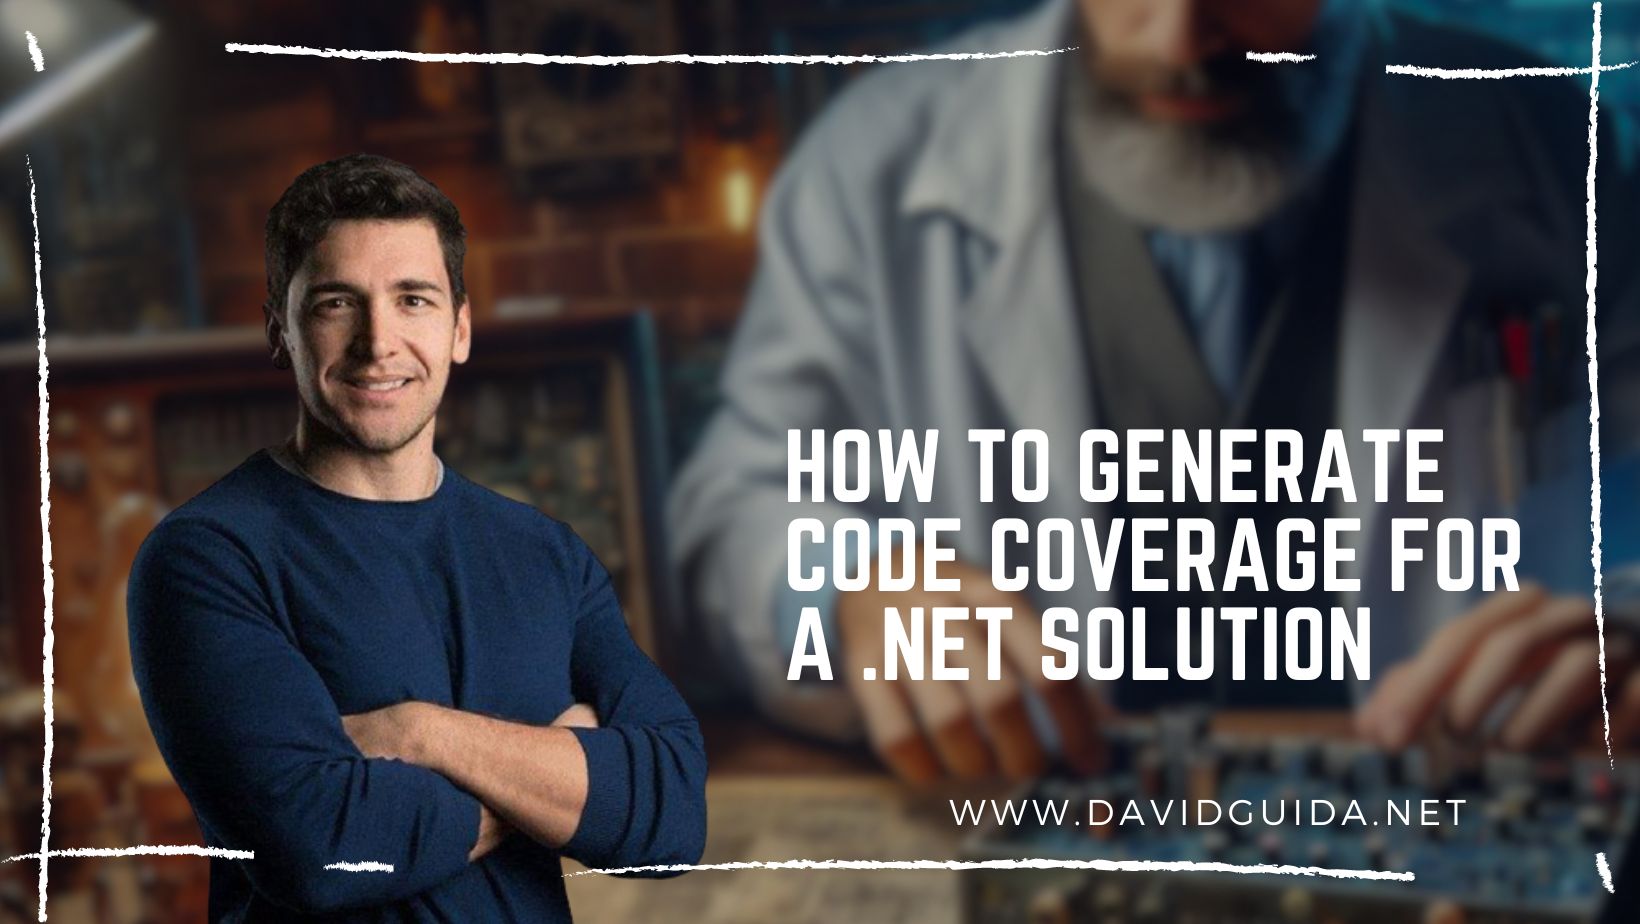 How to generate Code Coverage for a .NET Solution